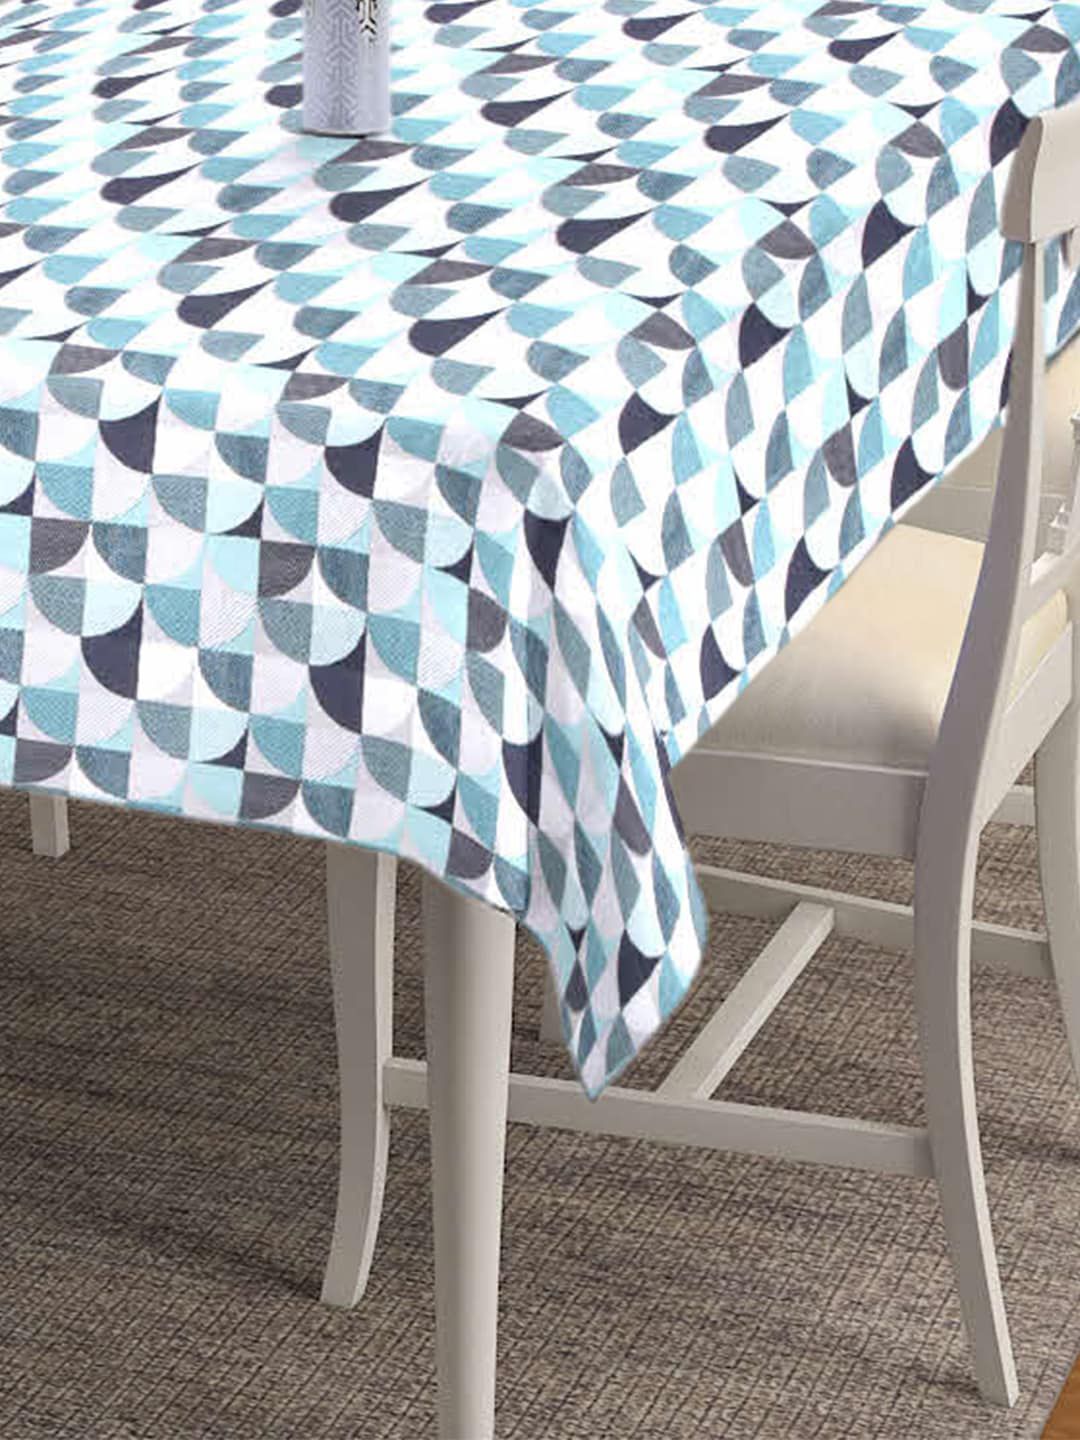 SHADES of LIFE White & Blue Printed Cotton Table Covers Price in India